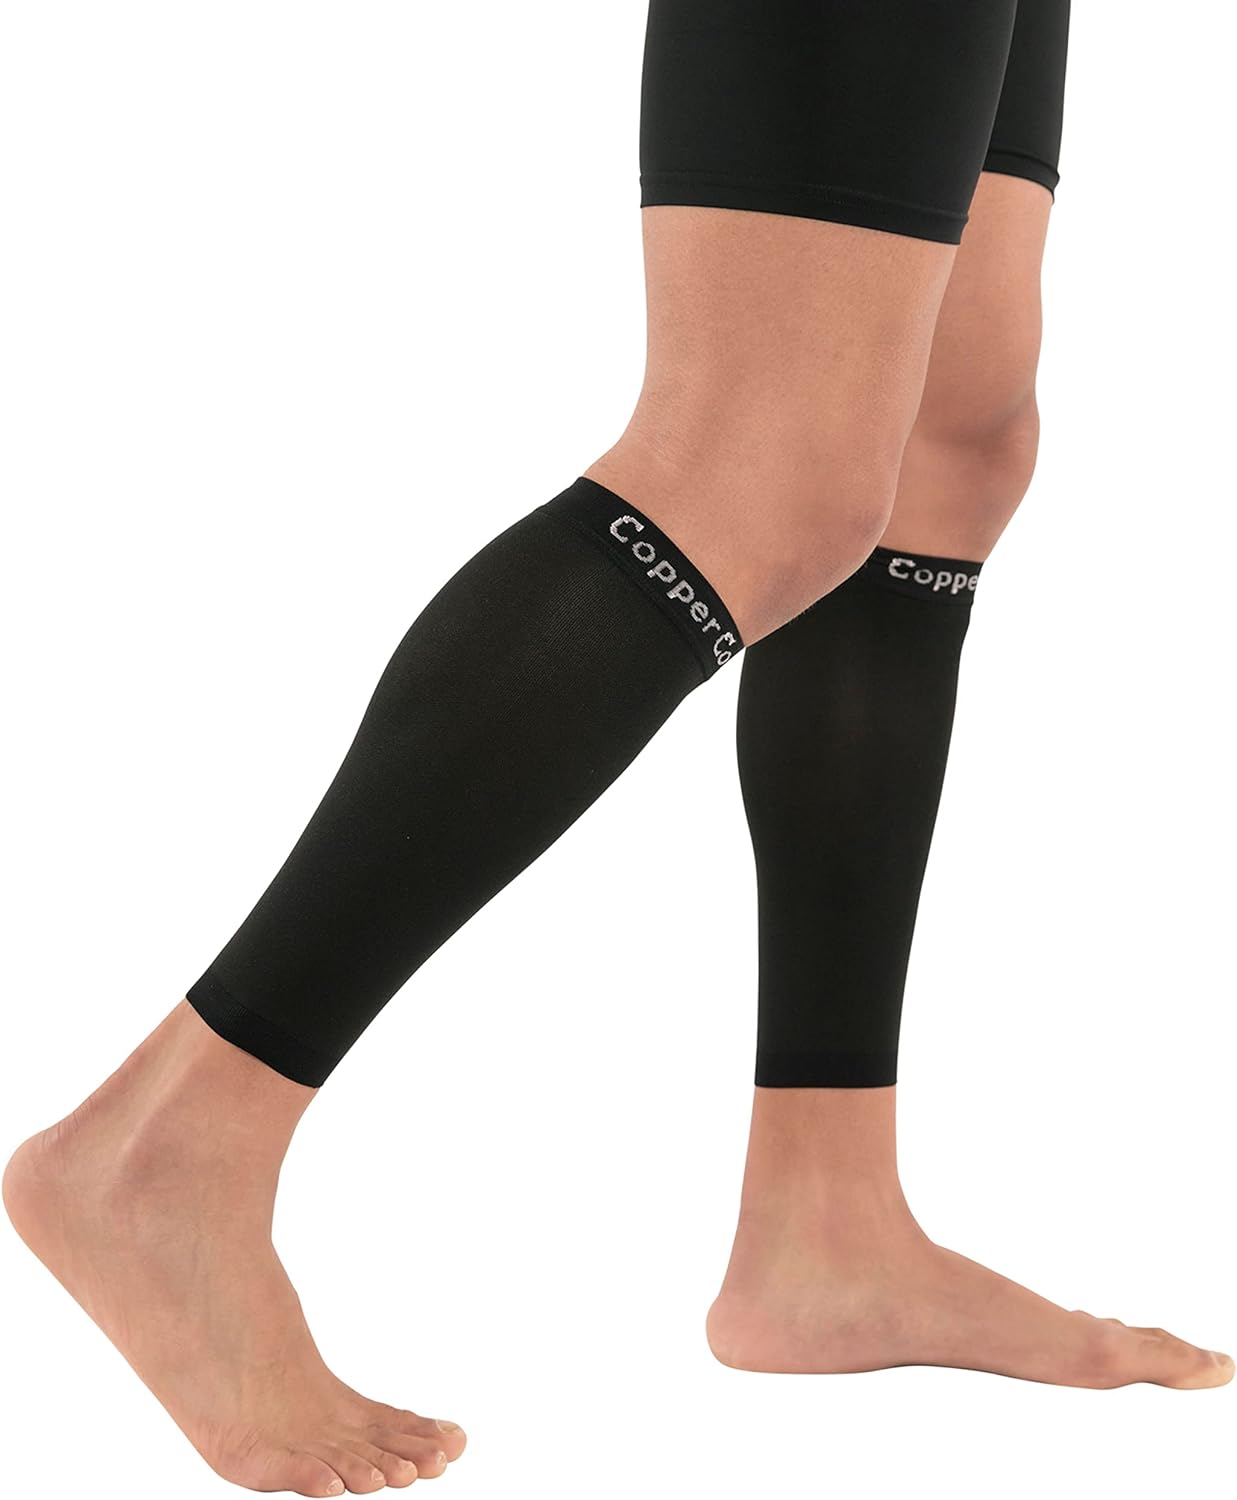 Featured Image for Copper Compression Calf Sleeves – Footless Compression Socks for Running, Cycling, & Fitness. Orthopedic Brace for Shin Splints, Varicose Veins, Arthritis, Sprains, Strains (1 Pair – M)